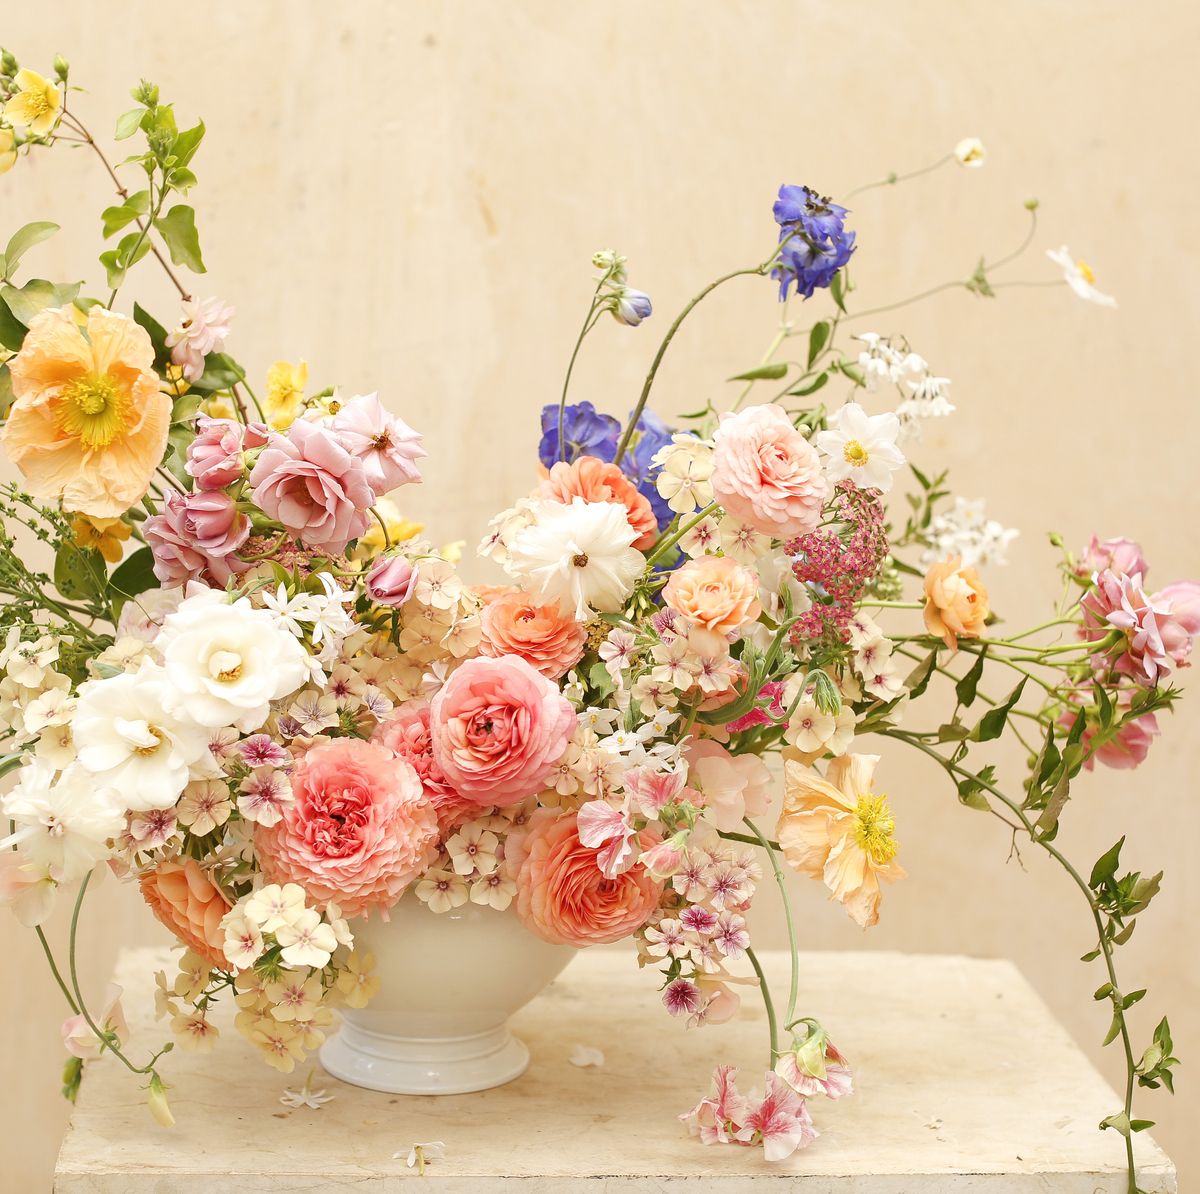 How to Arrange Flowers 2021- Flower Arranging Inspired by History